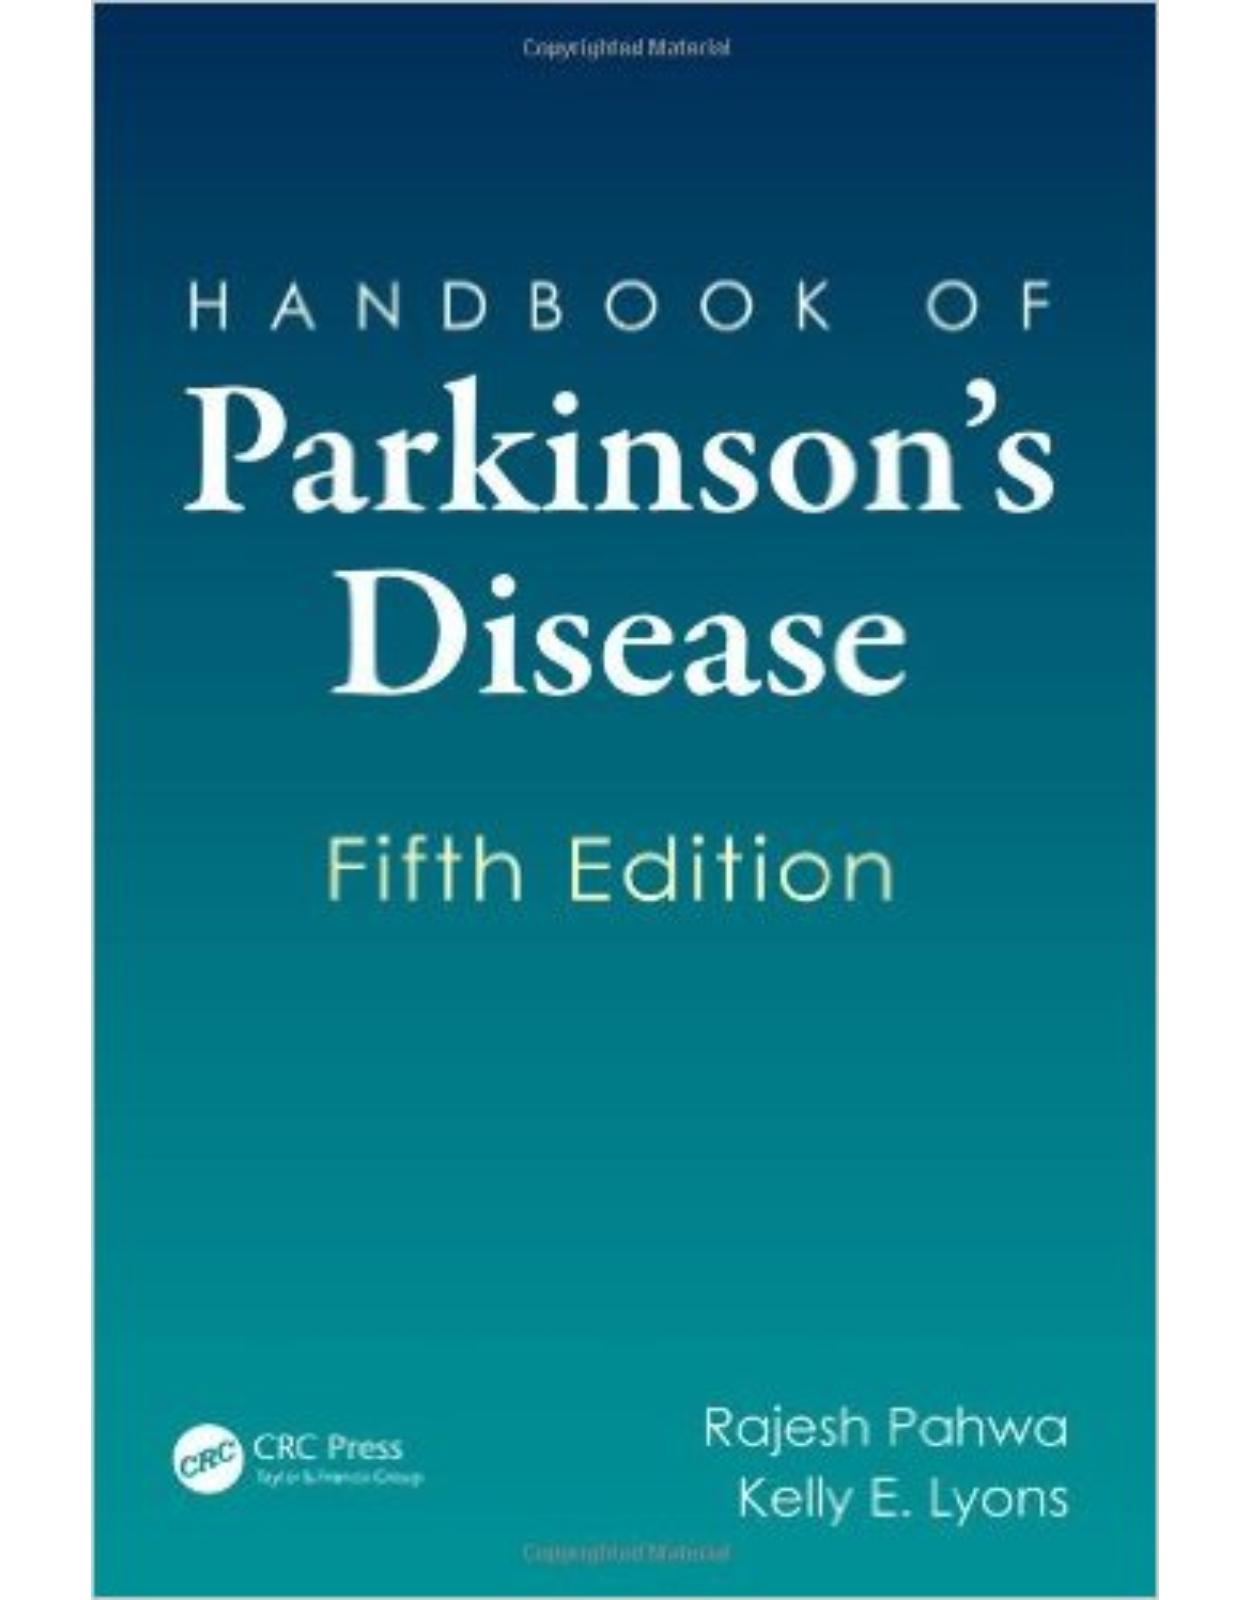 Handbook of Parkinson’s Disease, Fifth Edition (Neurological Disease and Therapy)